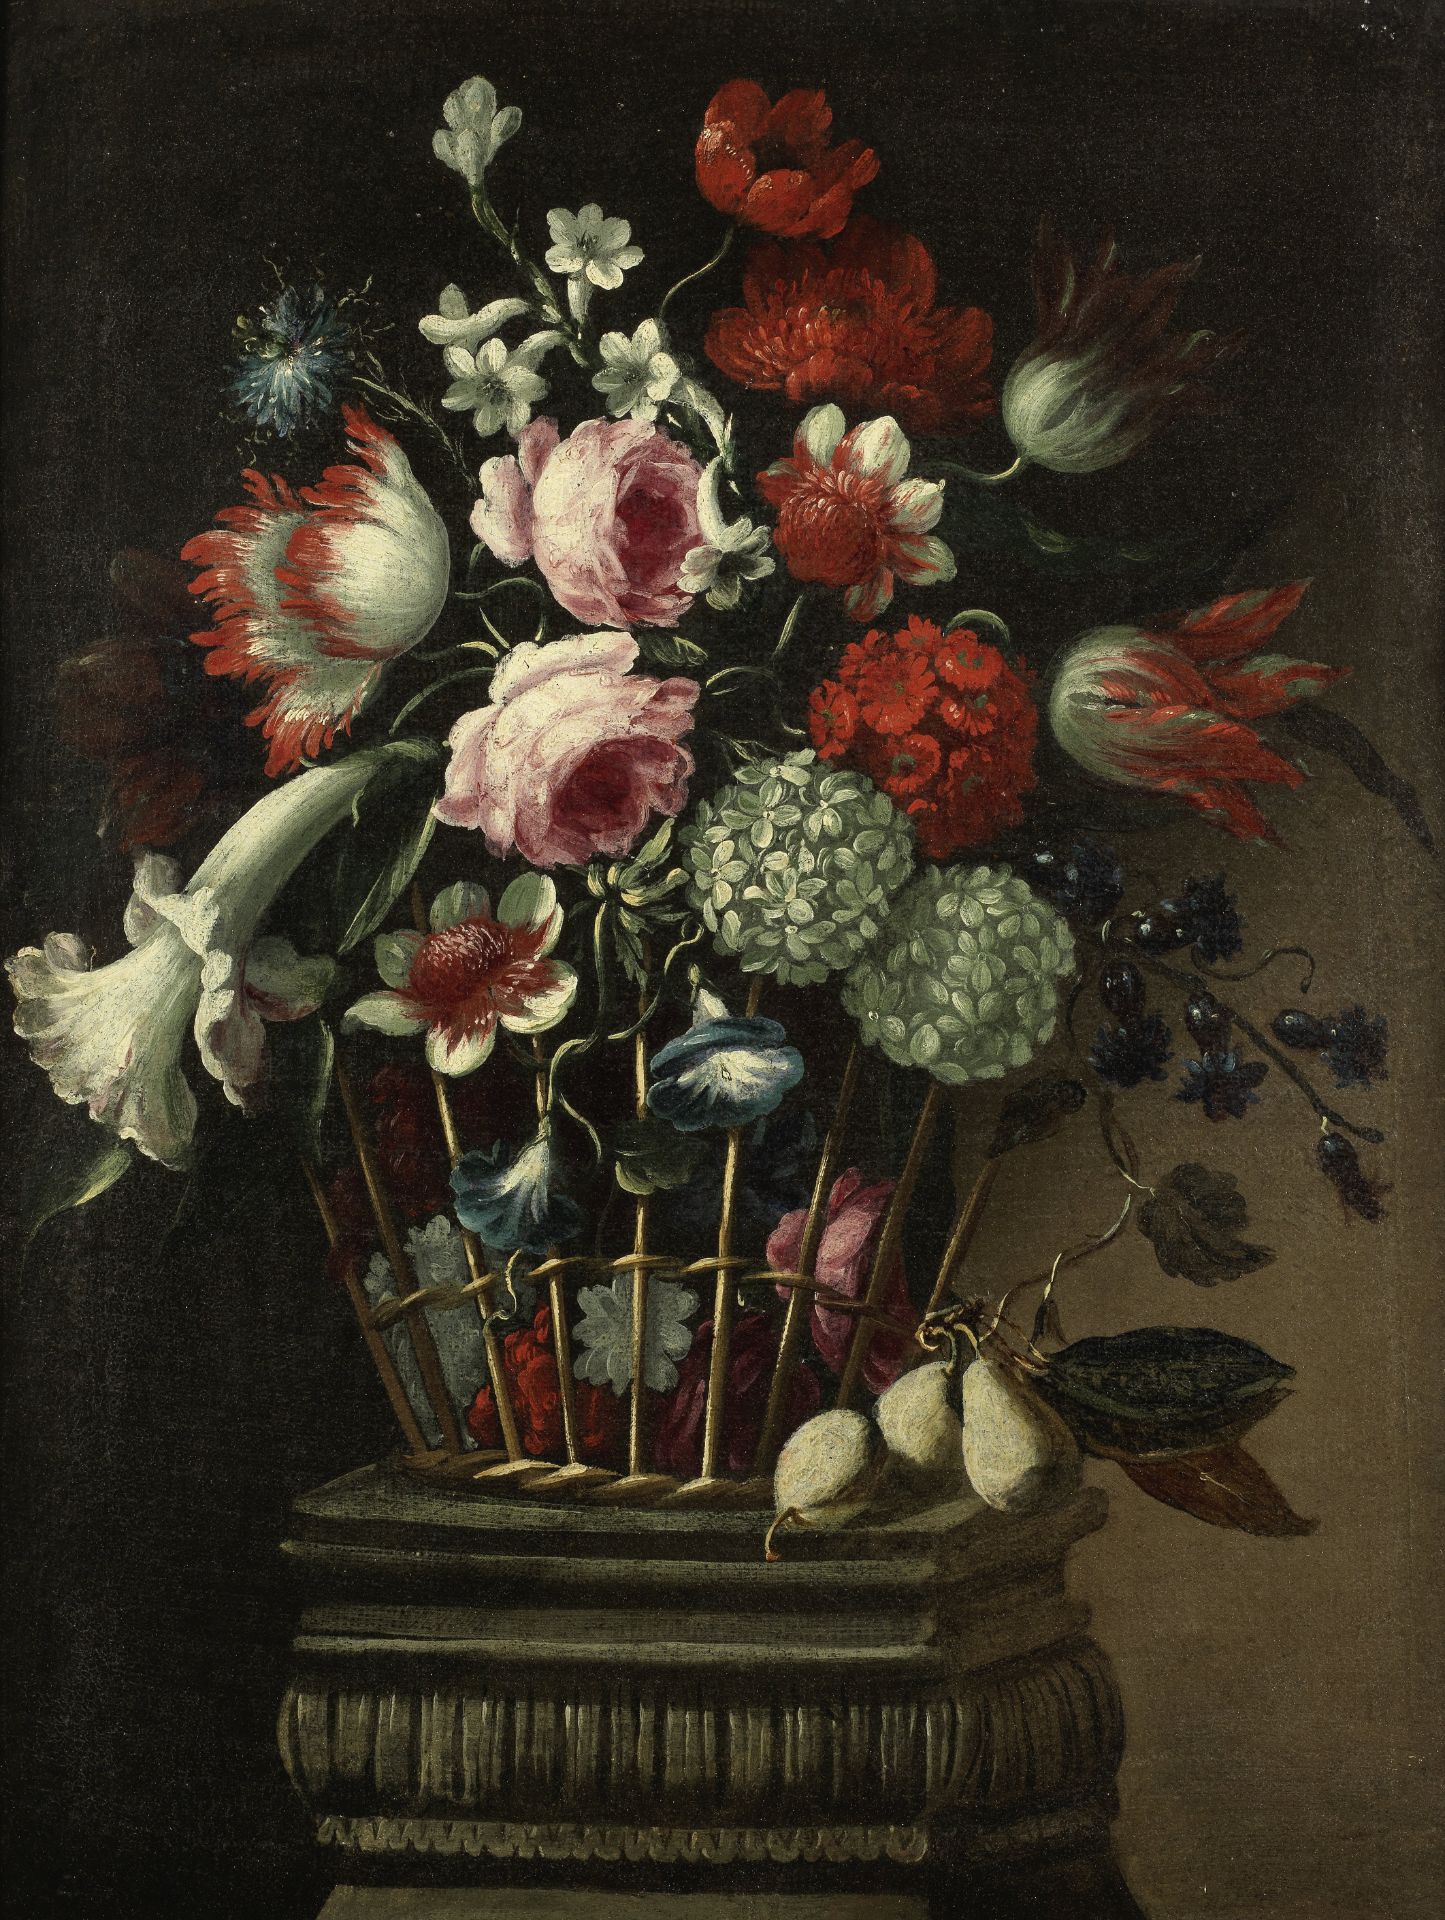 Spanish School, circa 1700 Roses, tulips, convolvulus and other flowers in a basket on a stone pl...